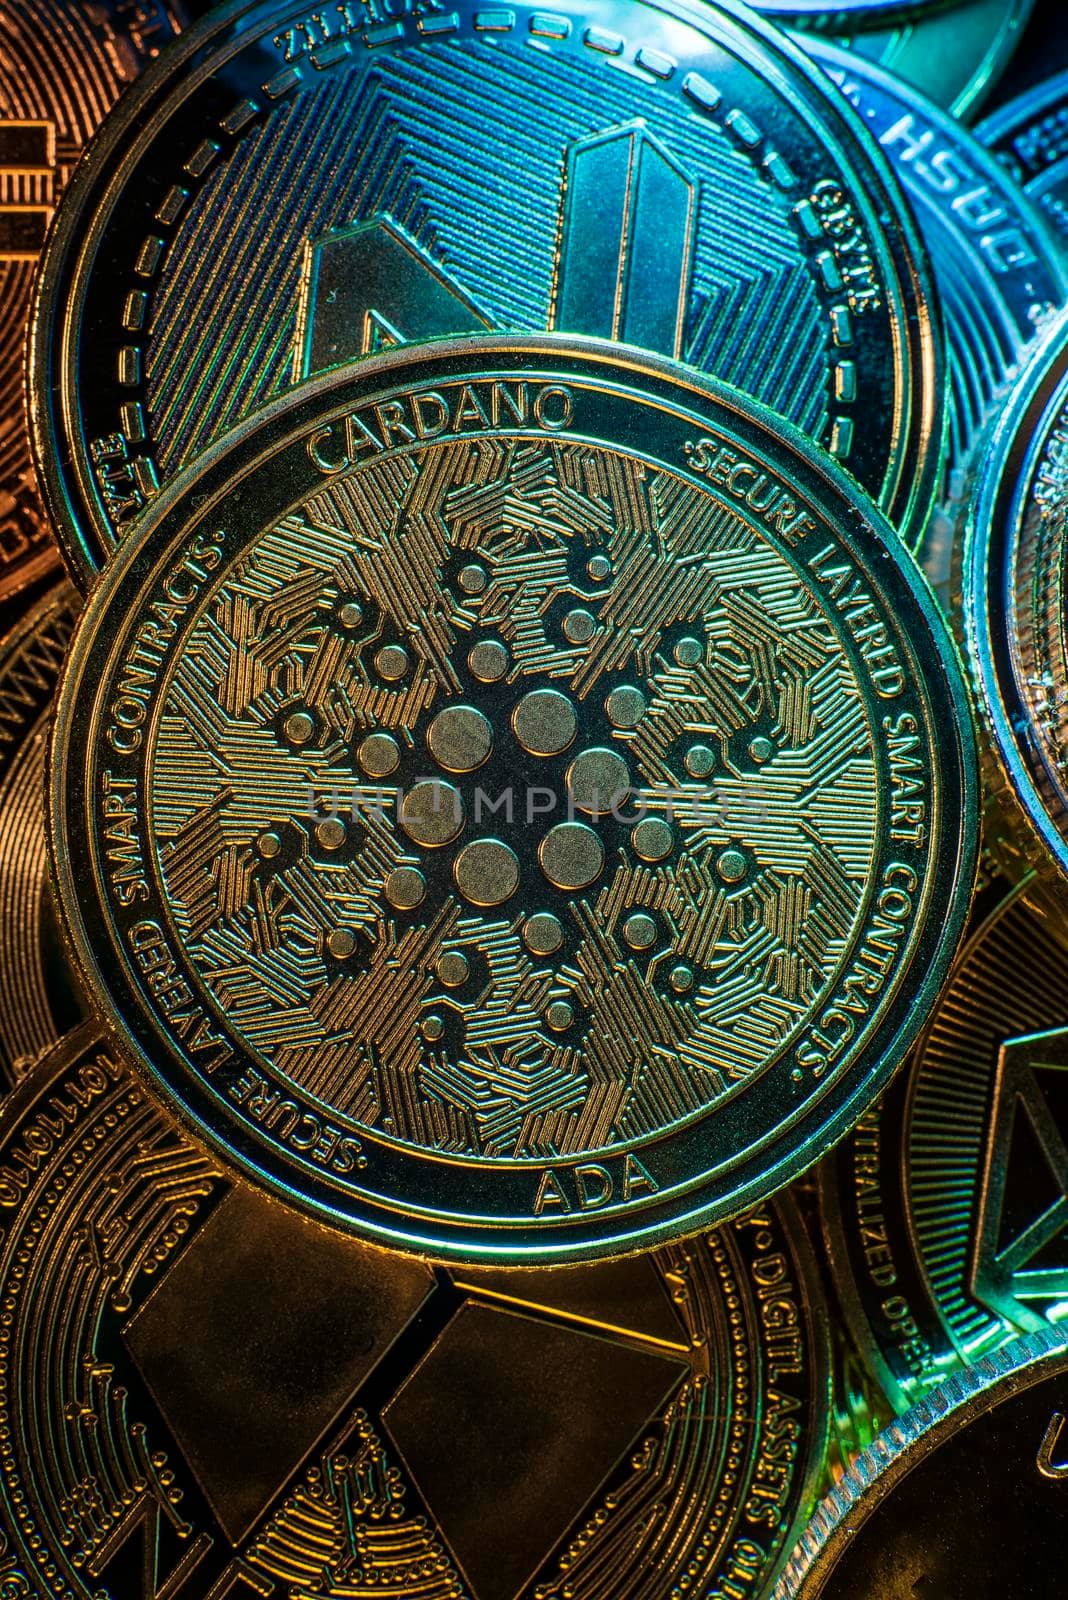 Horizontal view of cryptocurrency tokens, including Cardano, ADA, Bitcoin, dogecoin, and Ethereum seen from above on a black background. High quality photo